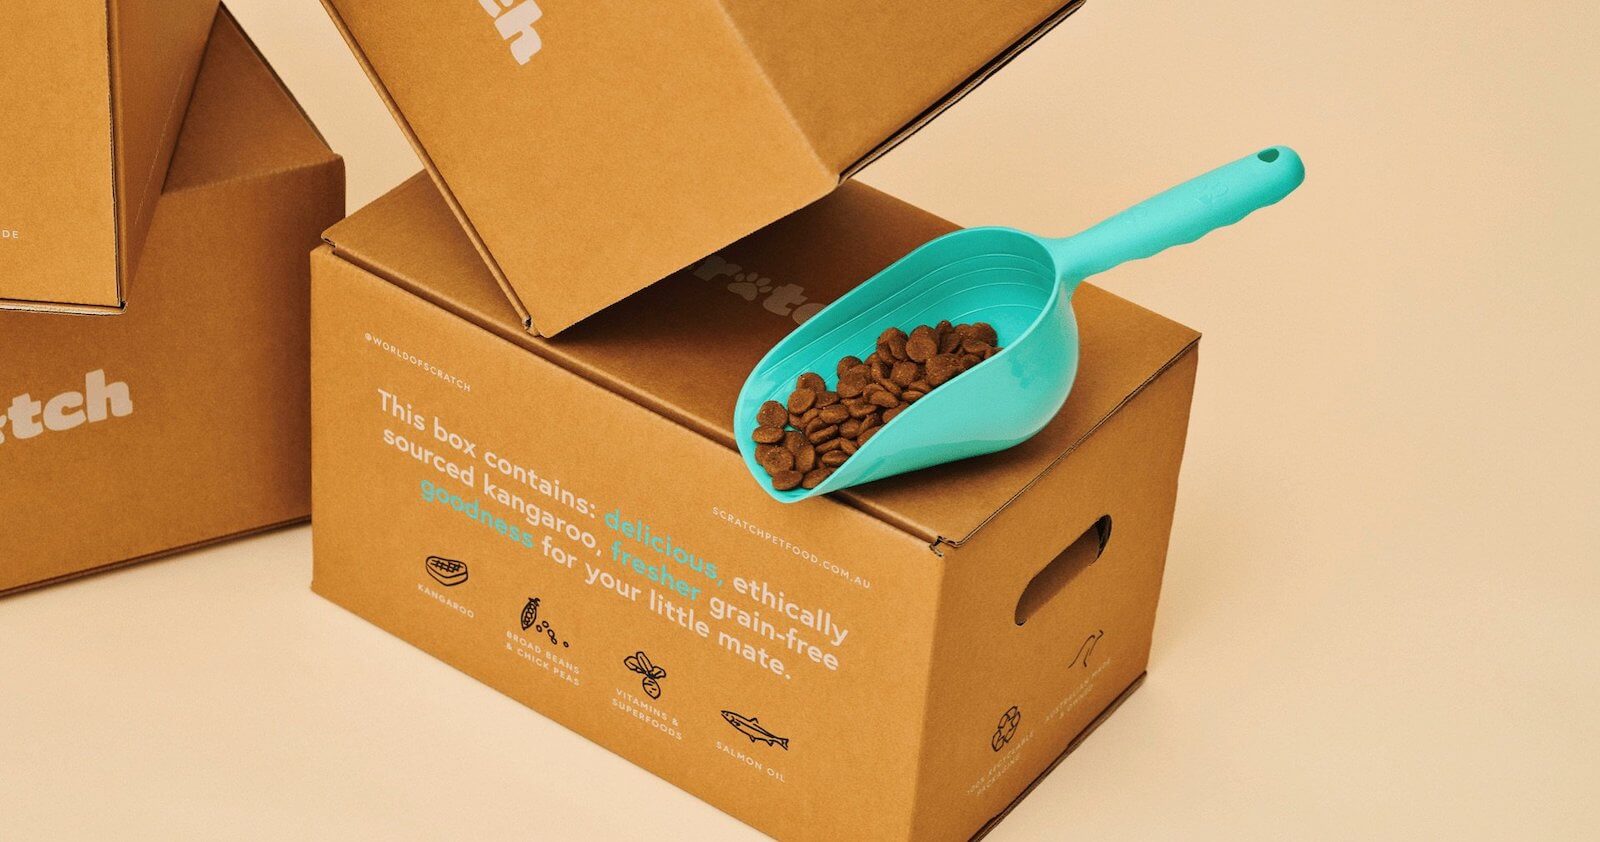 Scratch: Subscription dog food ruffling up the pet food industry